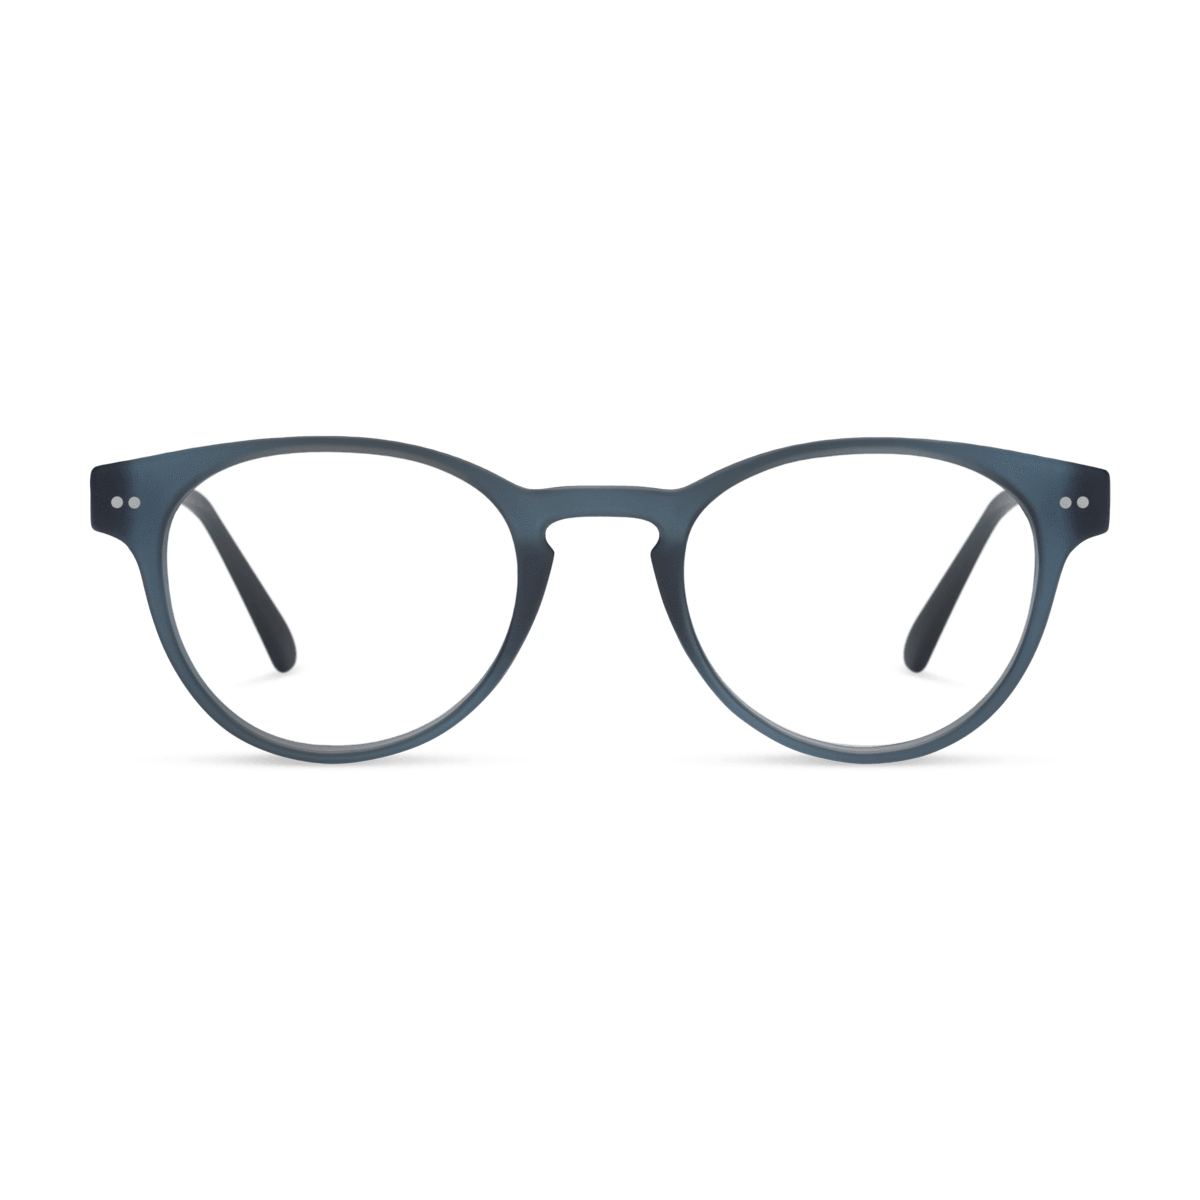 Abbey Readers READING GLASSES LOOK OPTIC Navy +1.00 